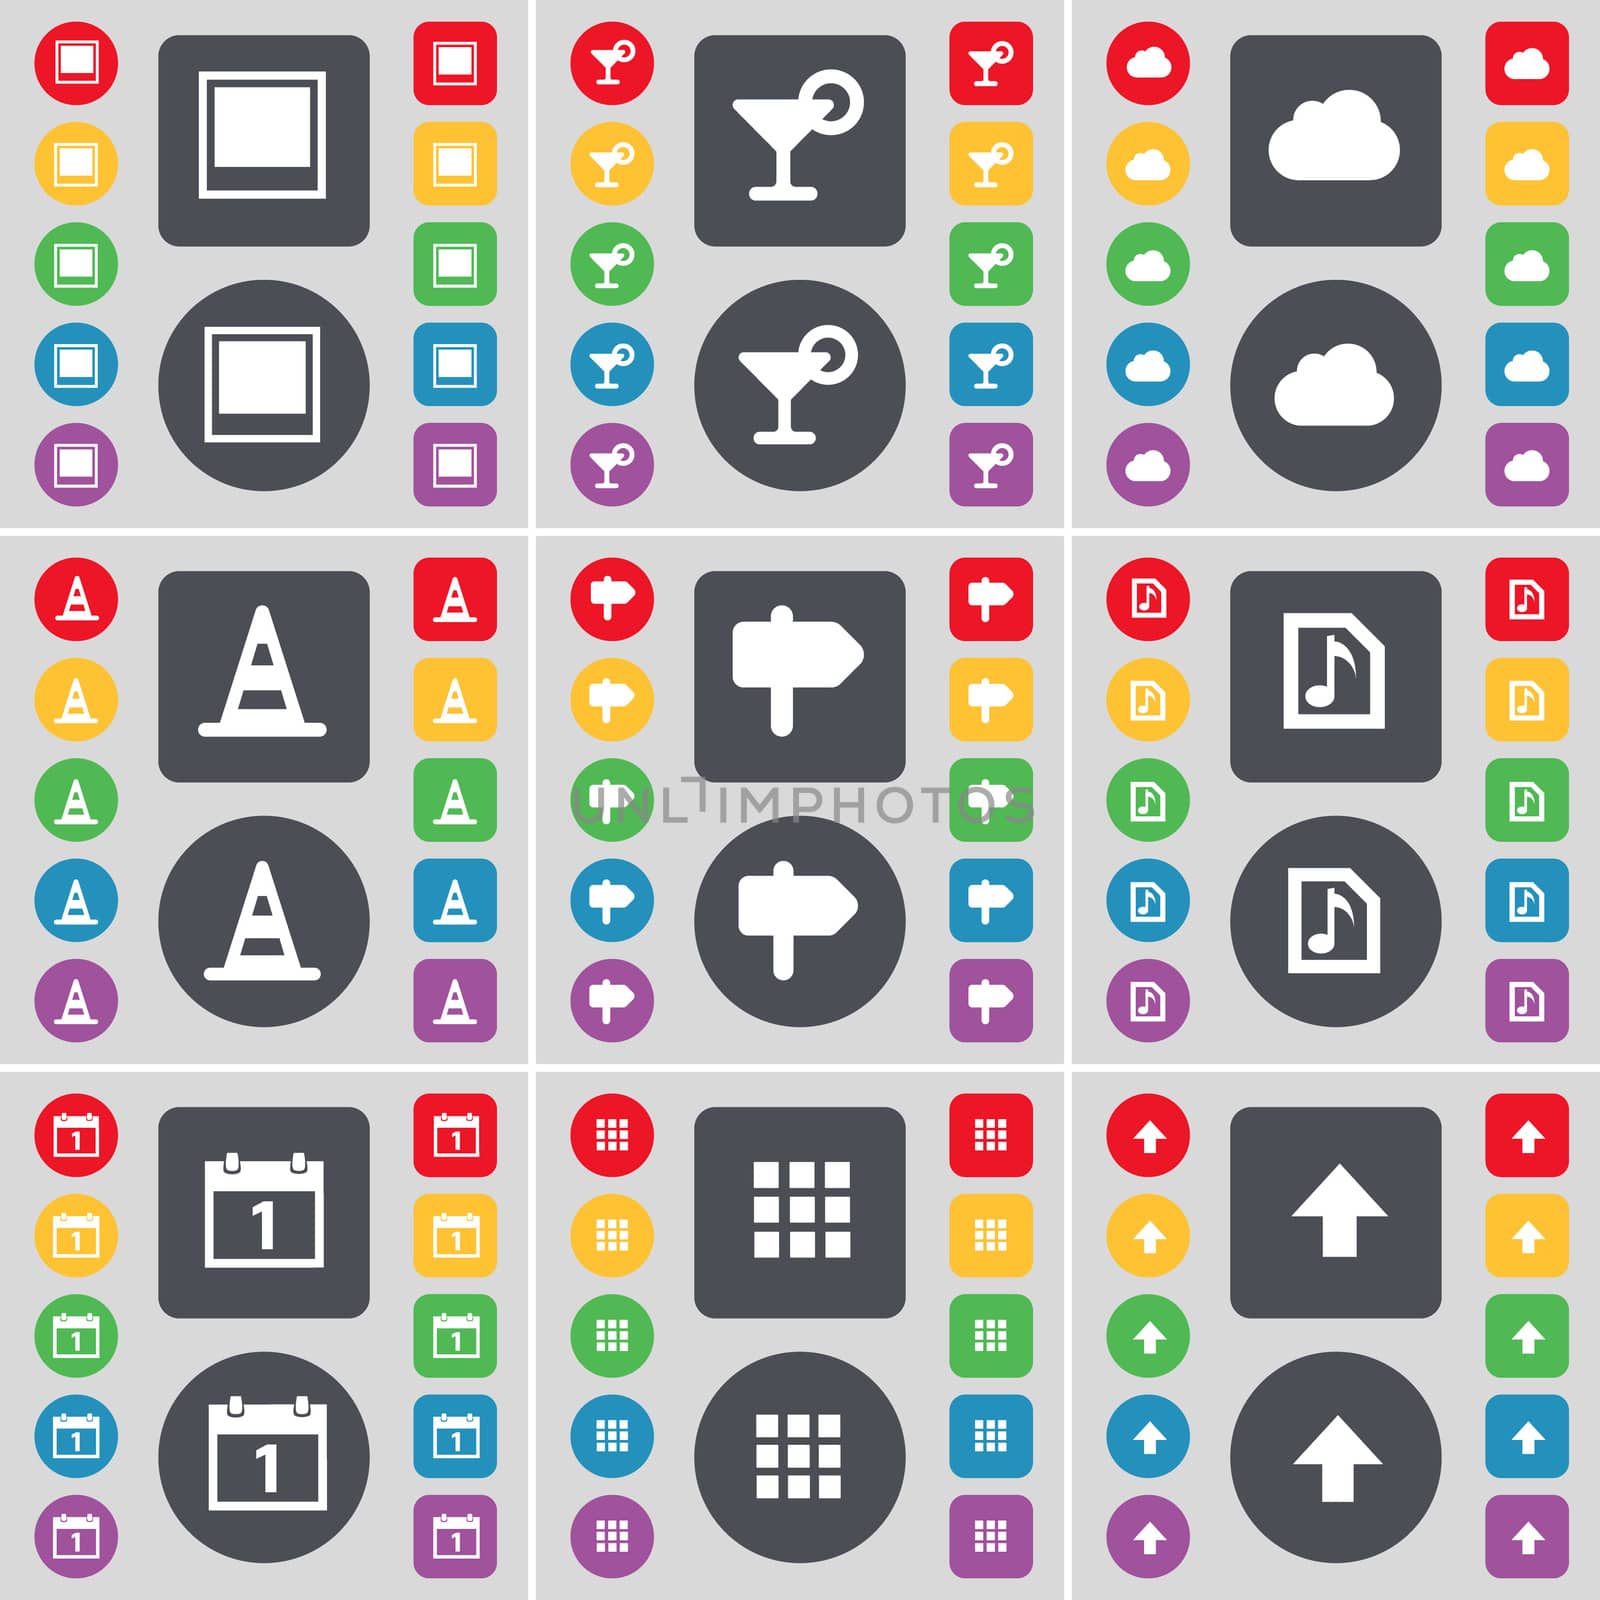 Window, Cocktail, Cloud, Cone, Signpost, Music file, Calendar, Apps, Arrow up icon symbol. A large set of flat, colored buttons for your design.  by serhii_lohvyniuk